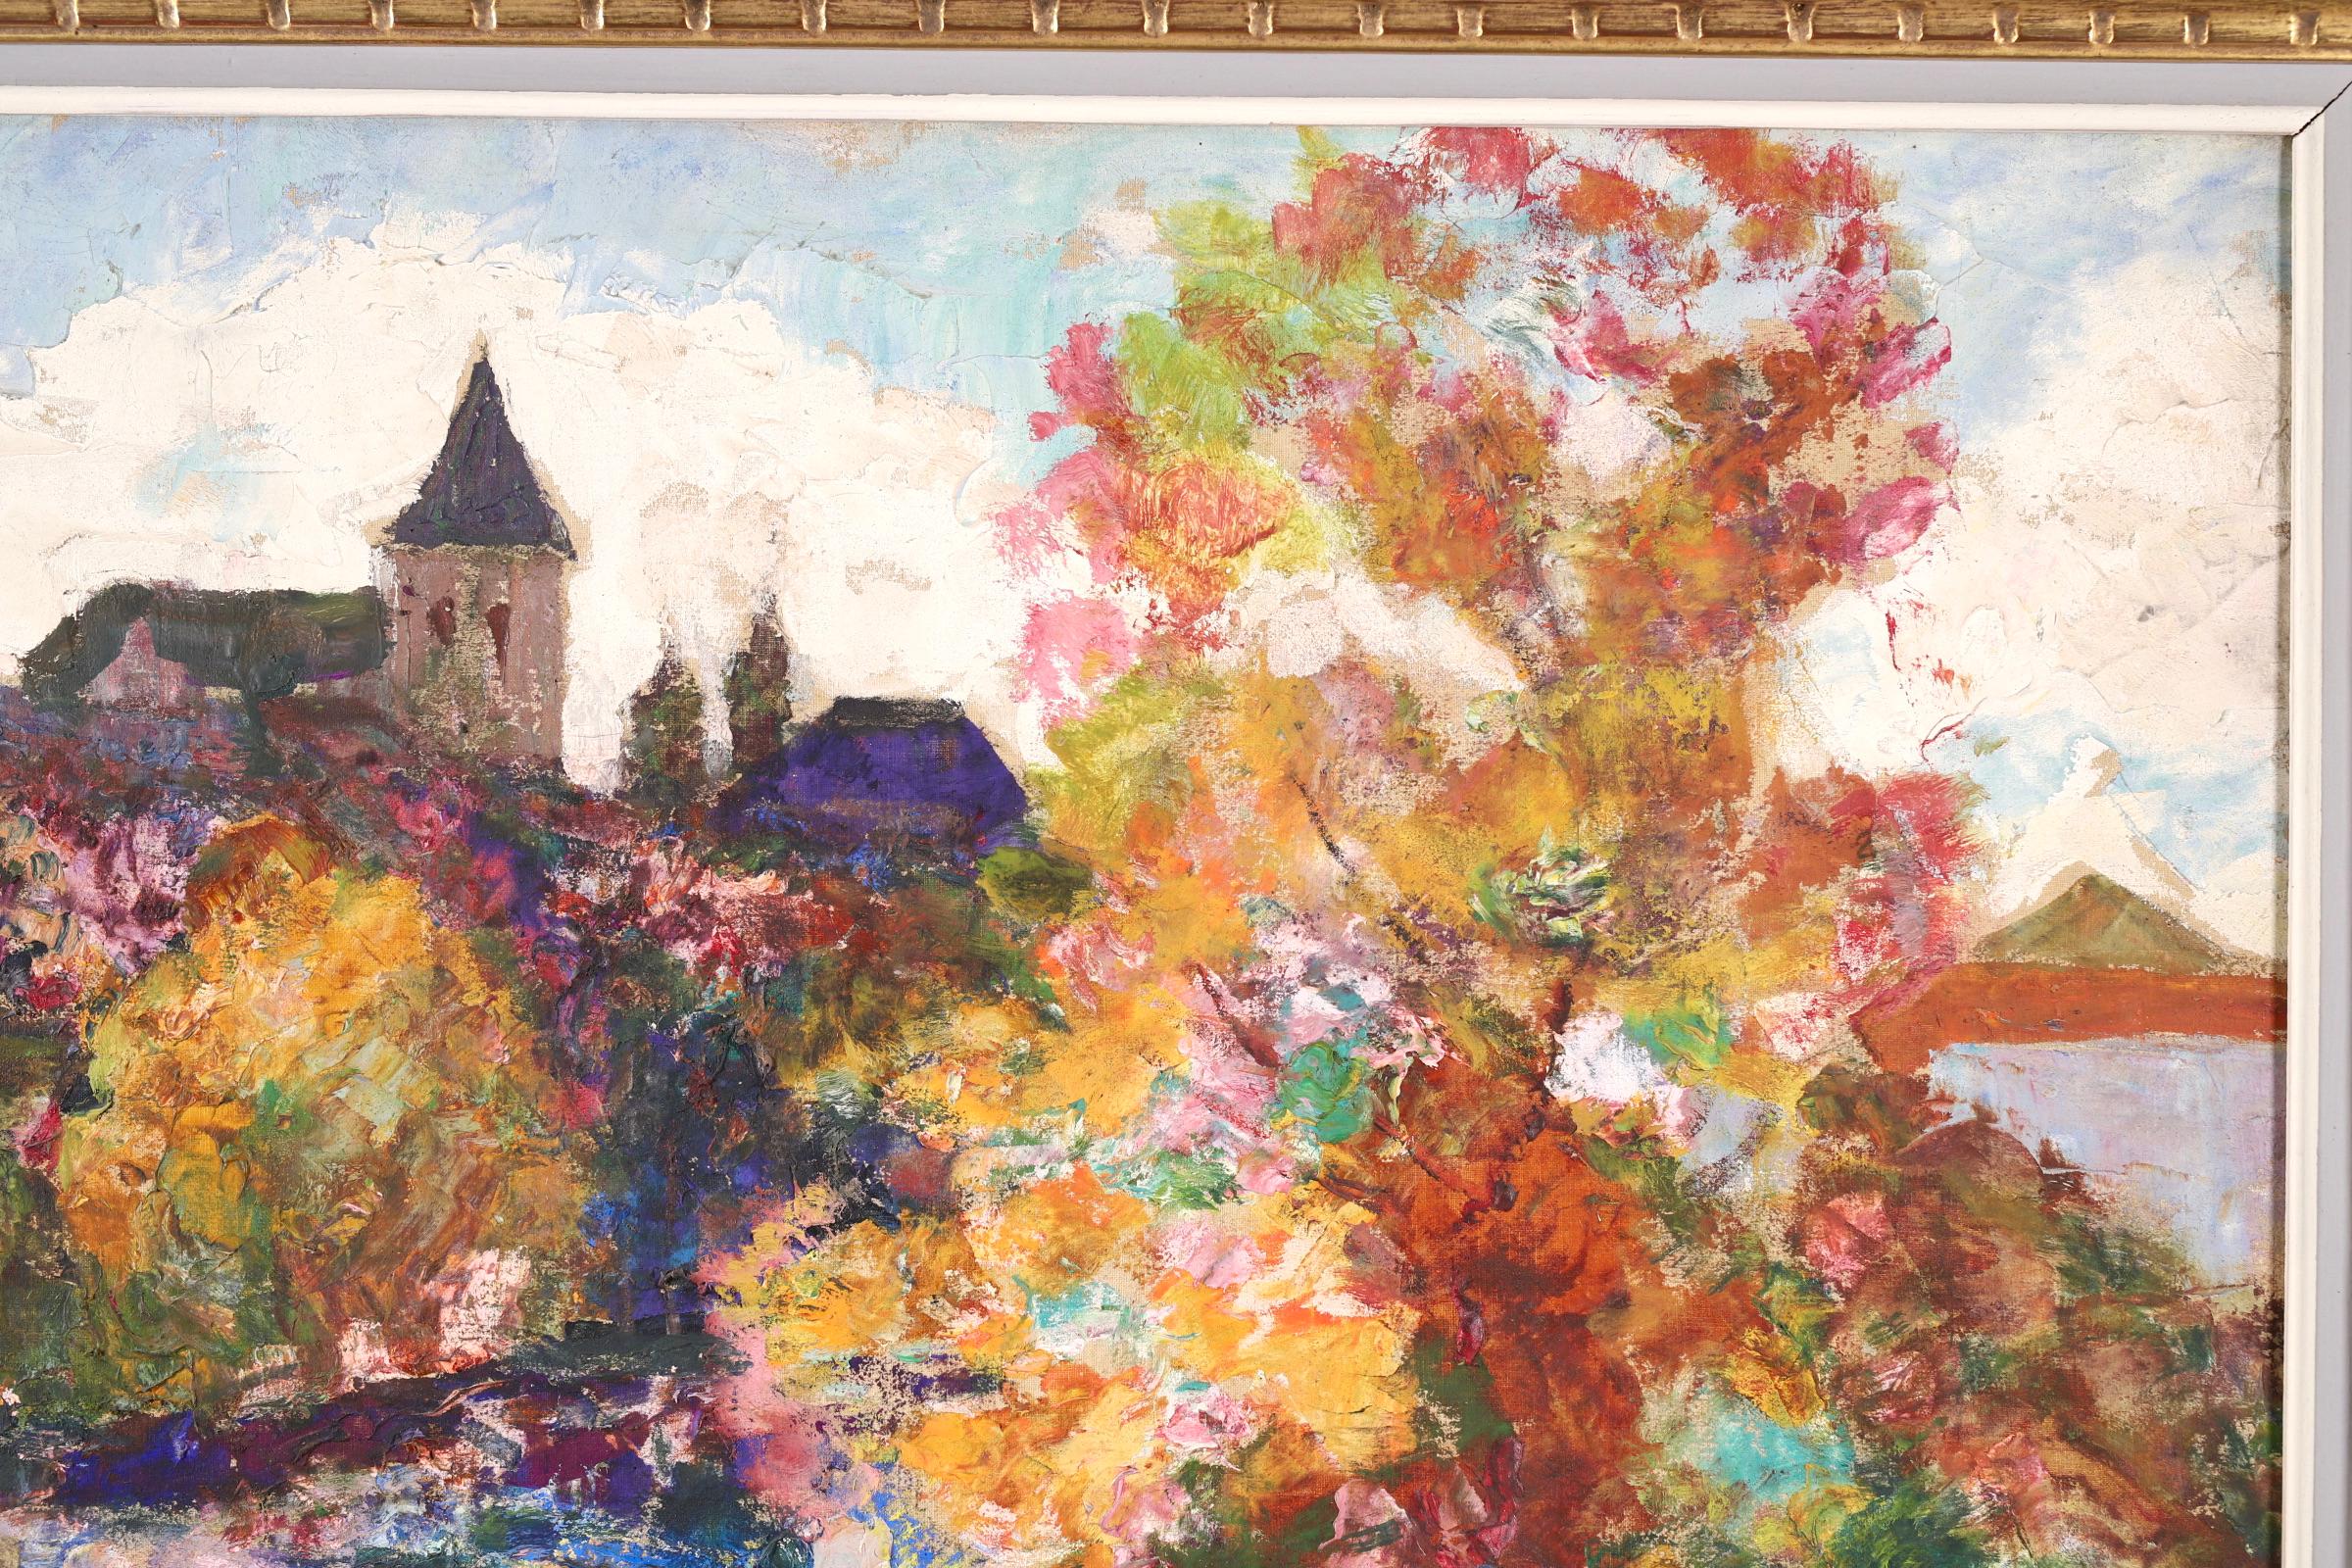 Stunning signed landscape oil on canvas circa 1910 by sought after French post impressionist painter Victor Charreton. A wonderful and colourful depiction of a green church garden law surrounded by plants in a kaleidoscope of colours - pinks,